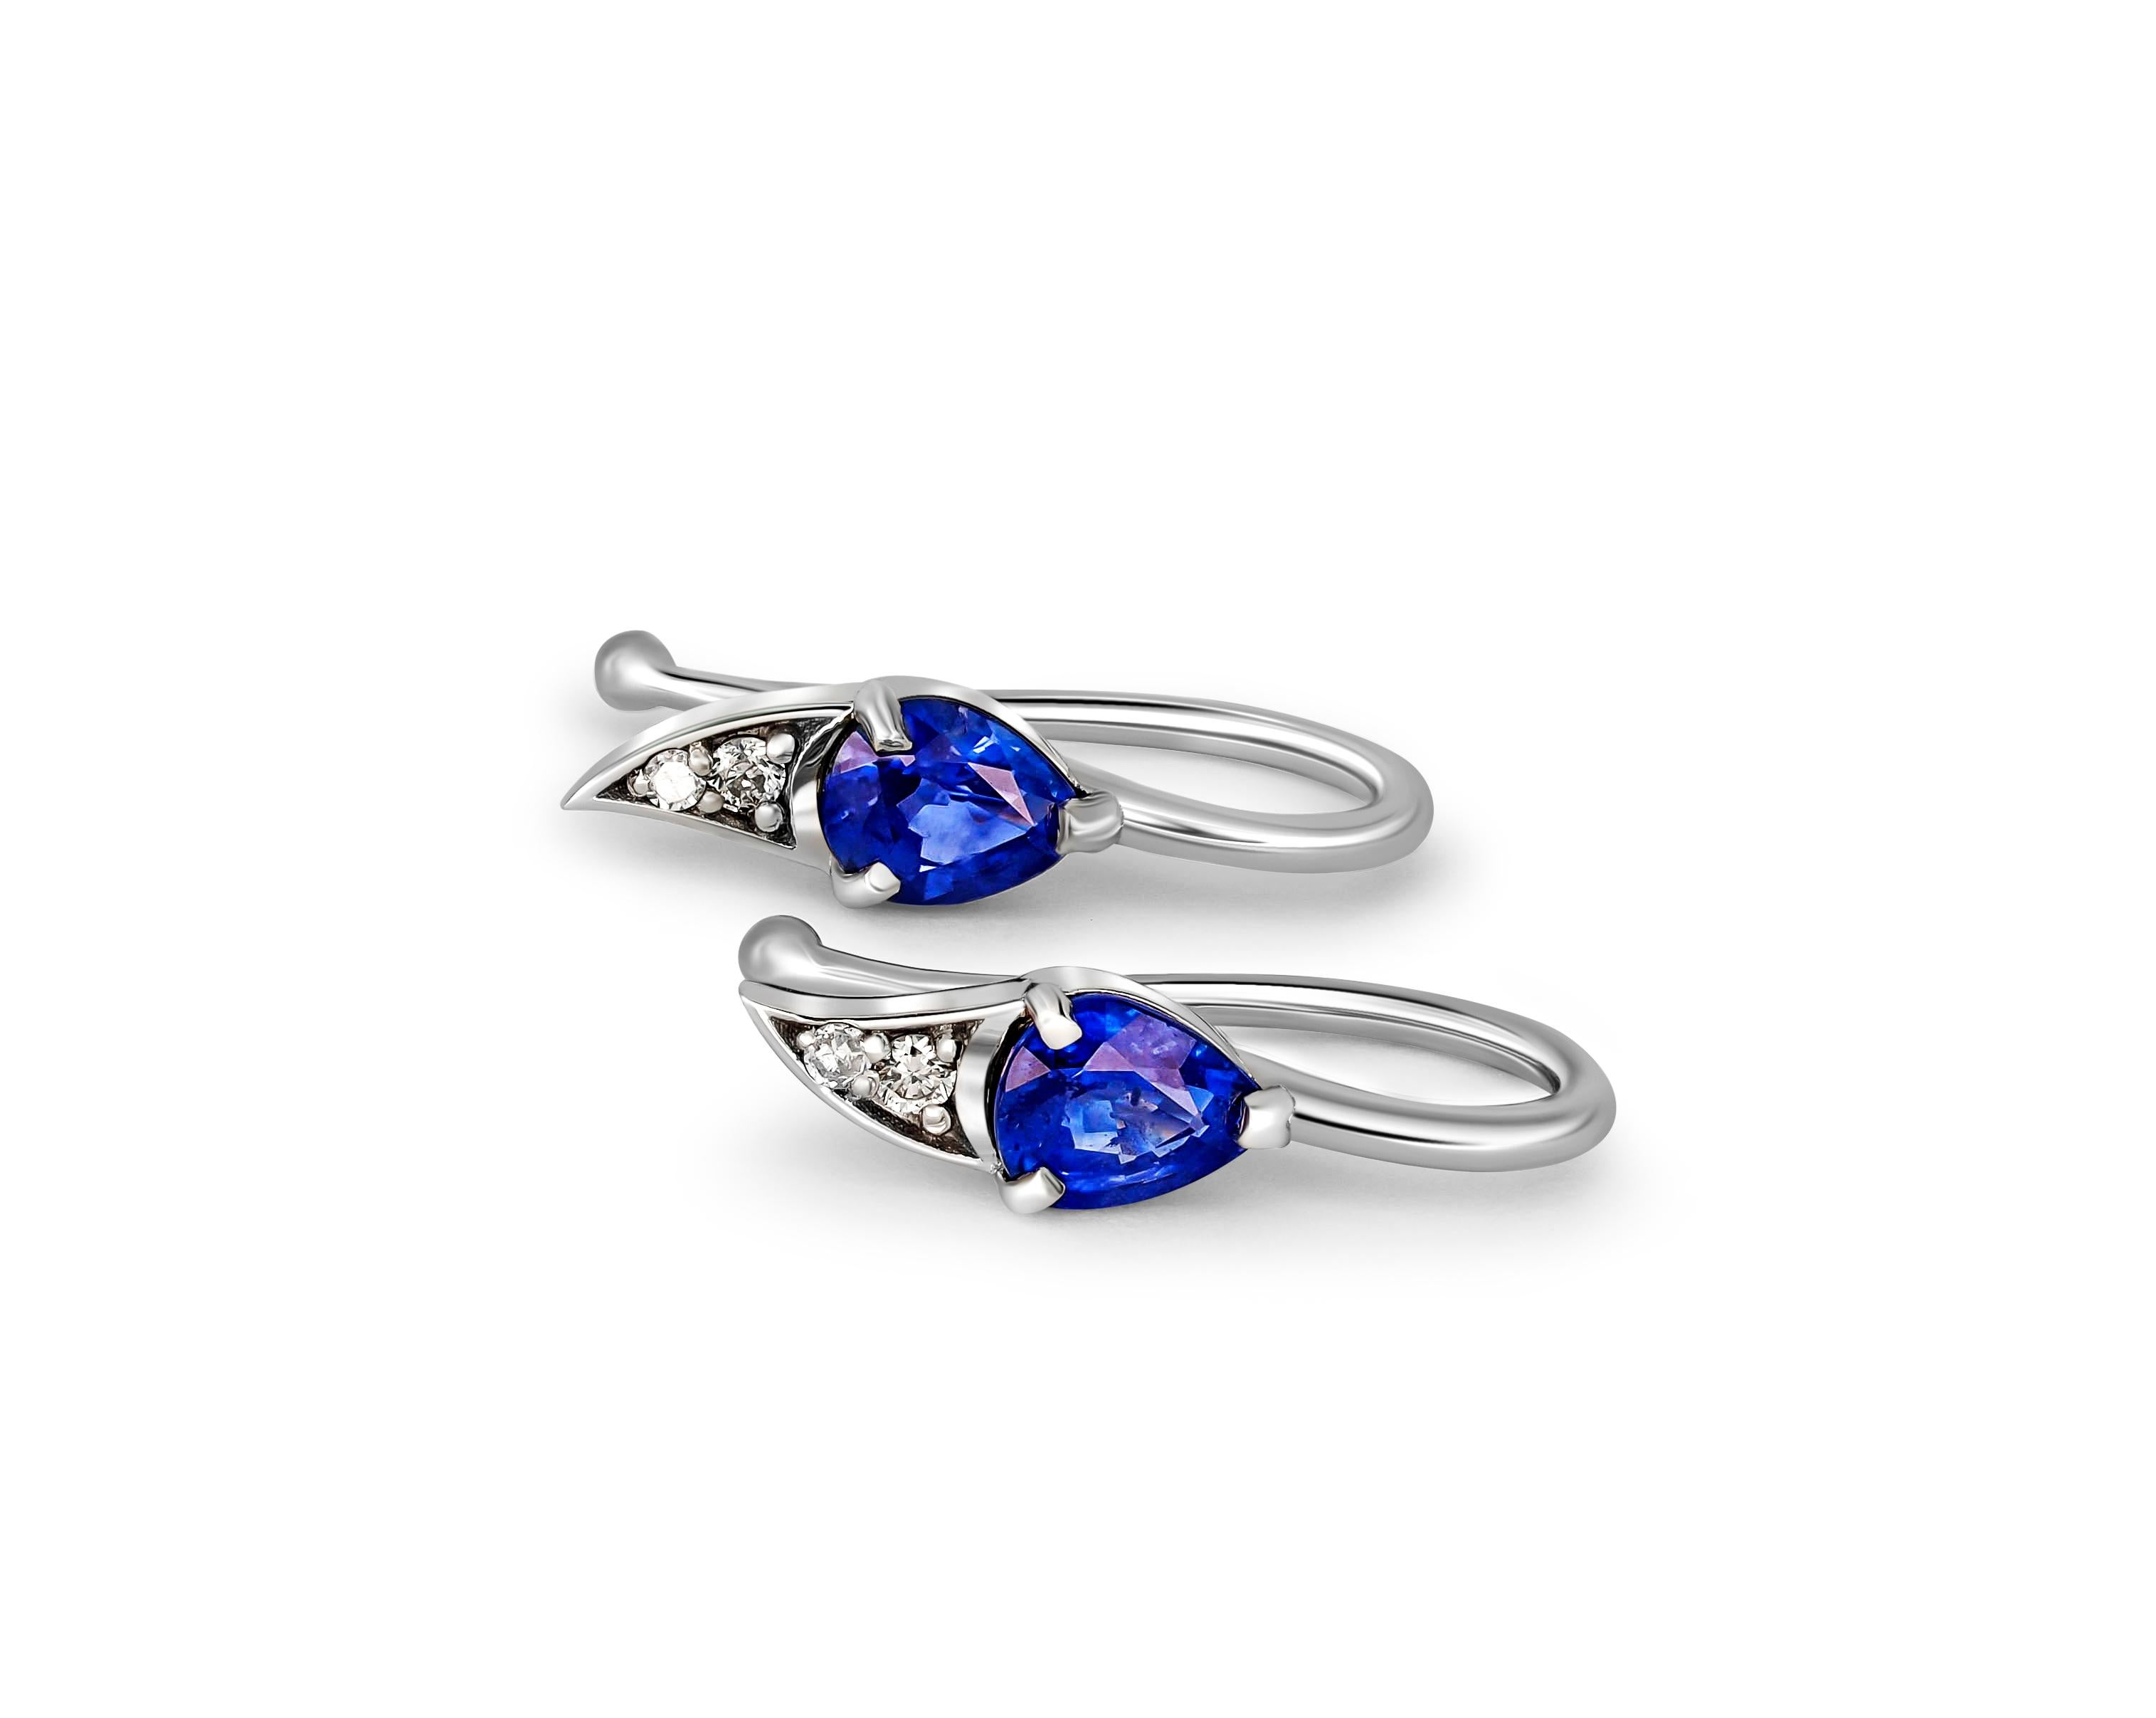 Pear sapphires 14k gold earrings. 
Blue sapphire earrings. Tiny sapphire earrings. Delicate sapphire earrings. Sapphire tear drop earrings.

Gold - 14 kt gold 
Weight: 1.5 gr
Size: 16.5x4.5 mm .

Central stones: 
Sapphires, 2 pieces, pear cut,